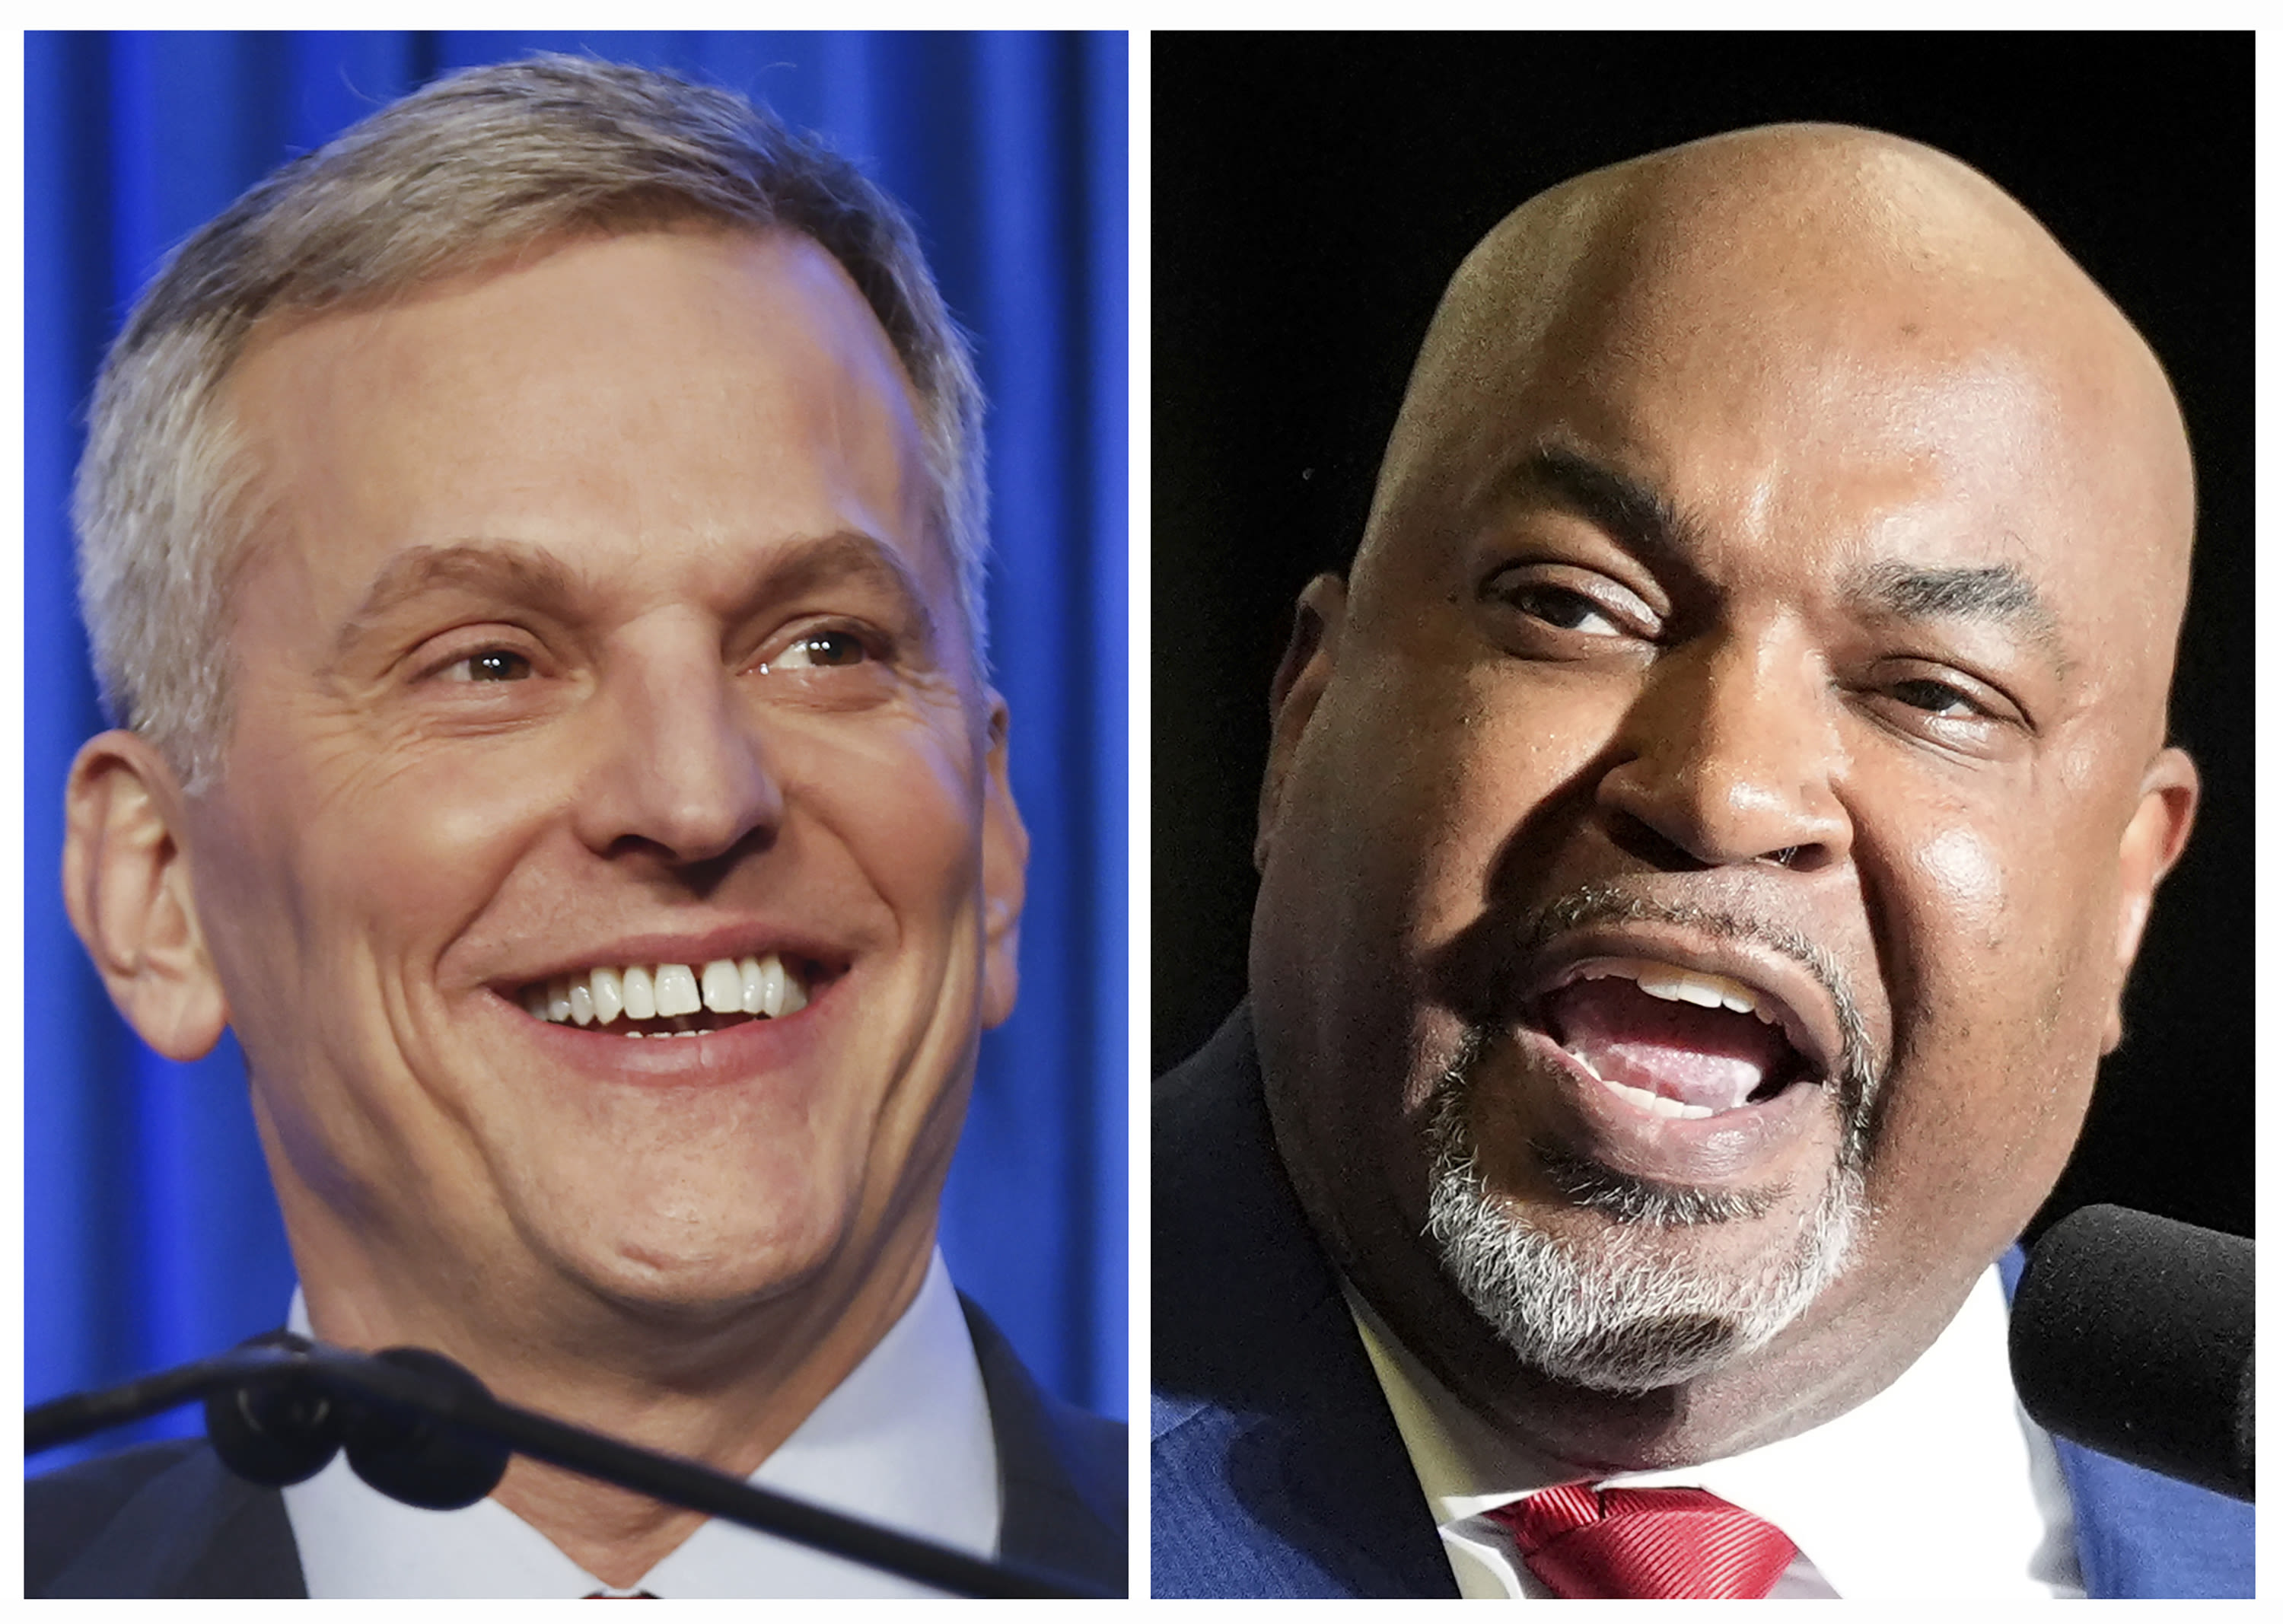 What you should know about North Carolina's race for governor